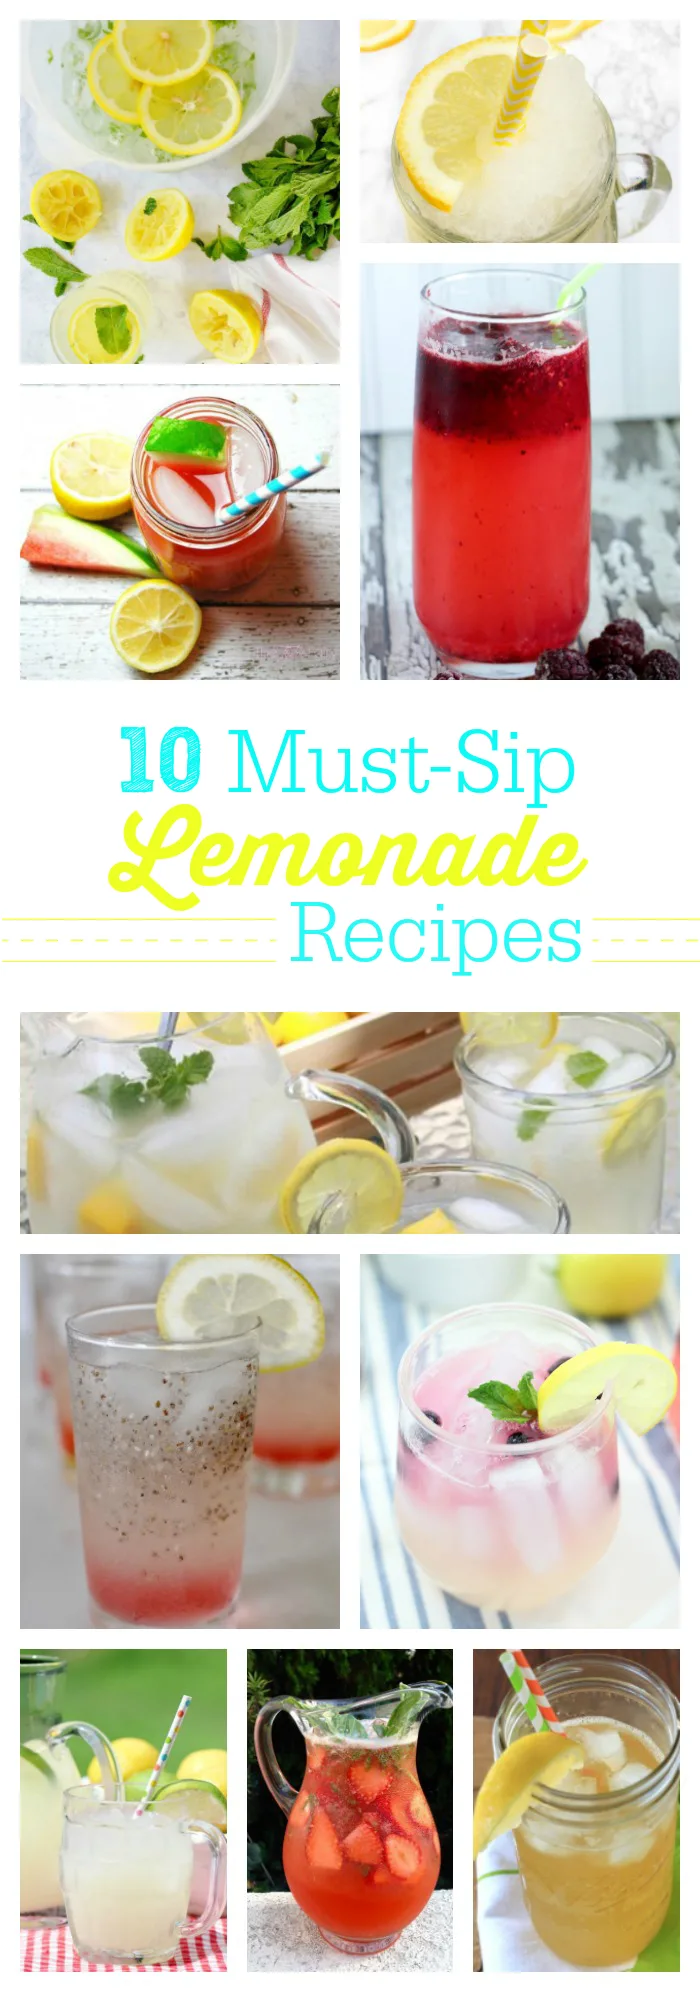 Refresh yo self this summer with these 10 tasty Lemonade recipes. From sparkling lemonade to fresh berry & herbs. Yum.